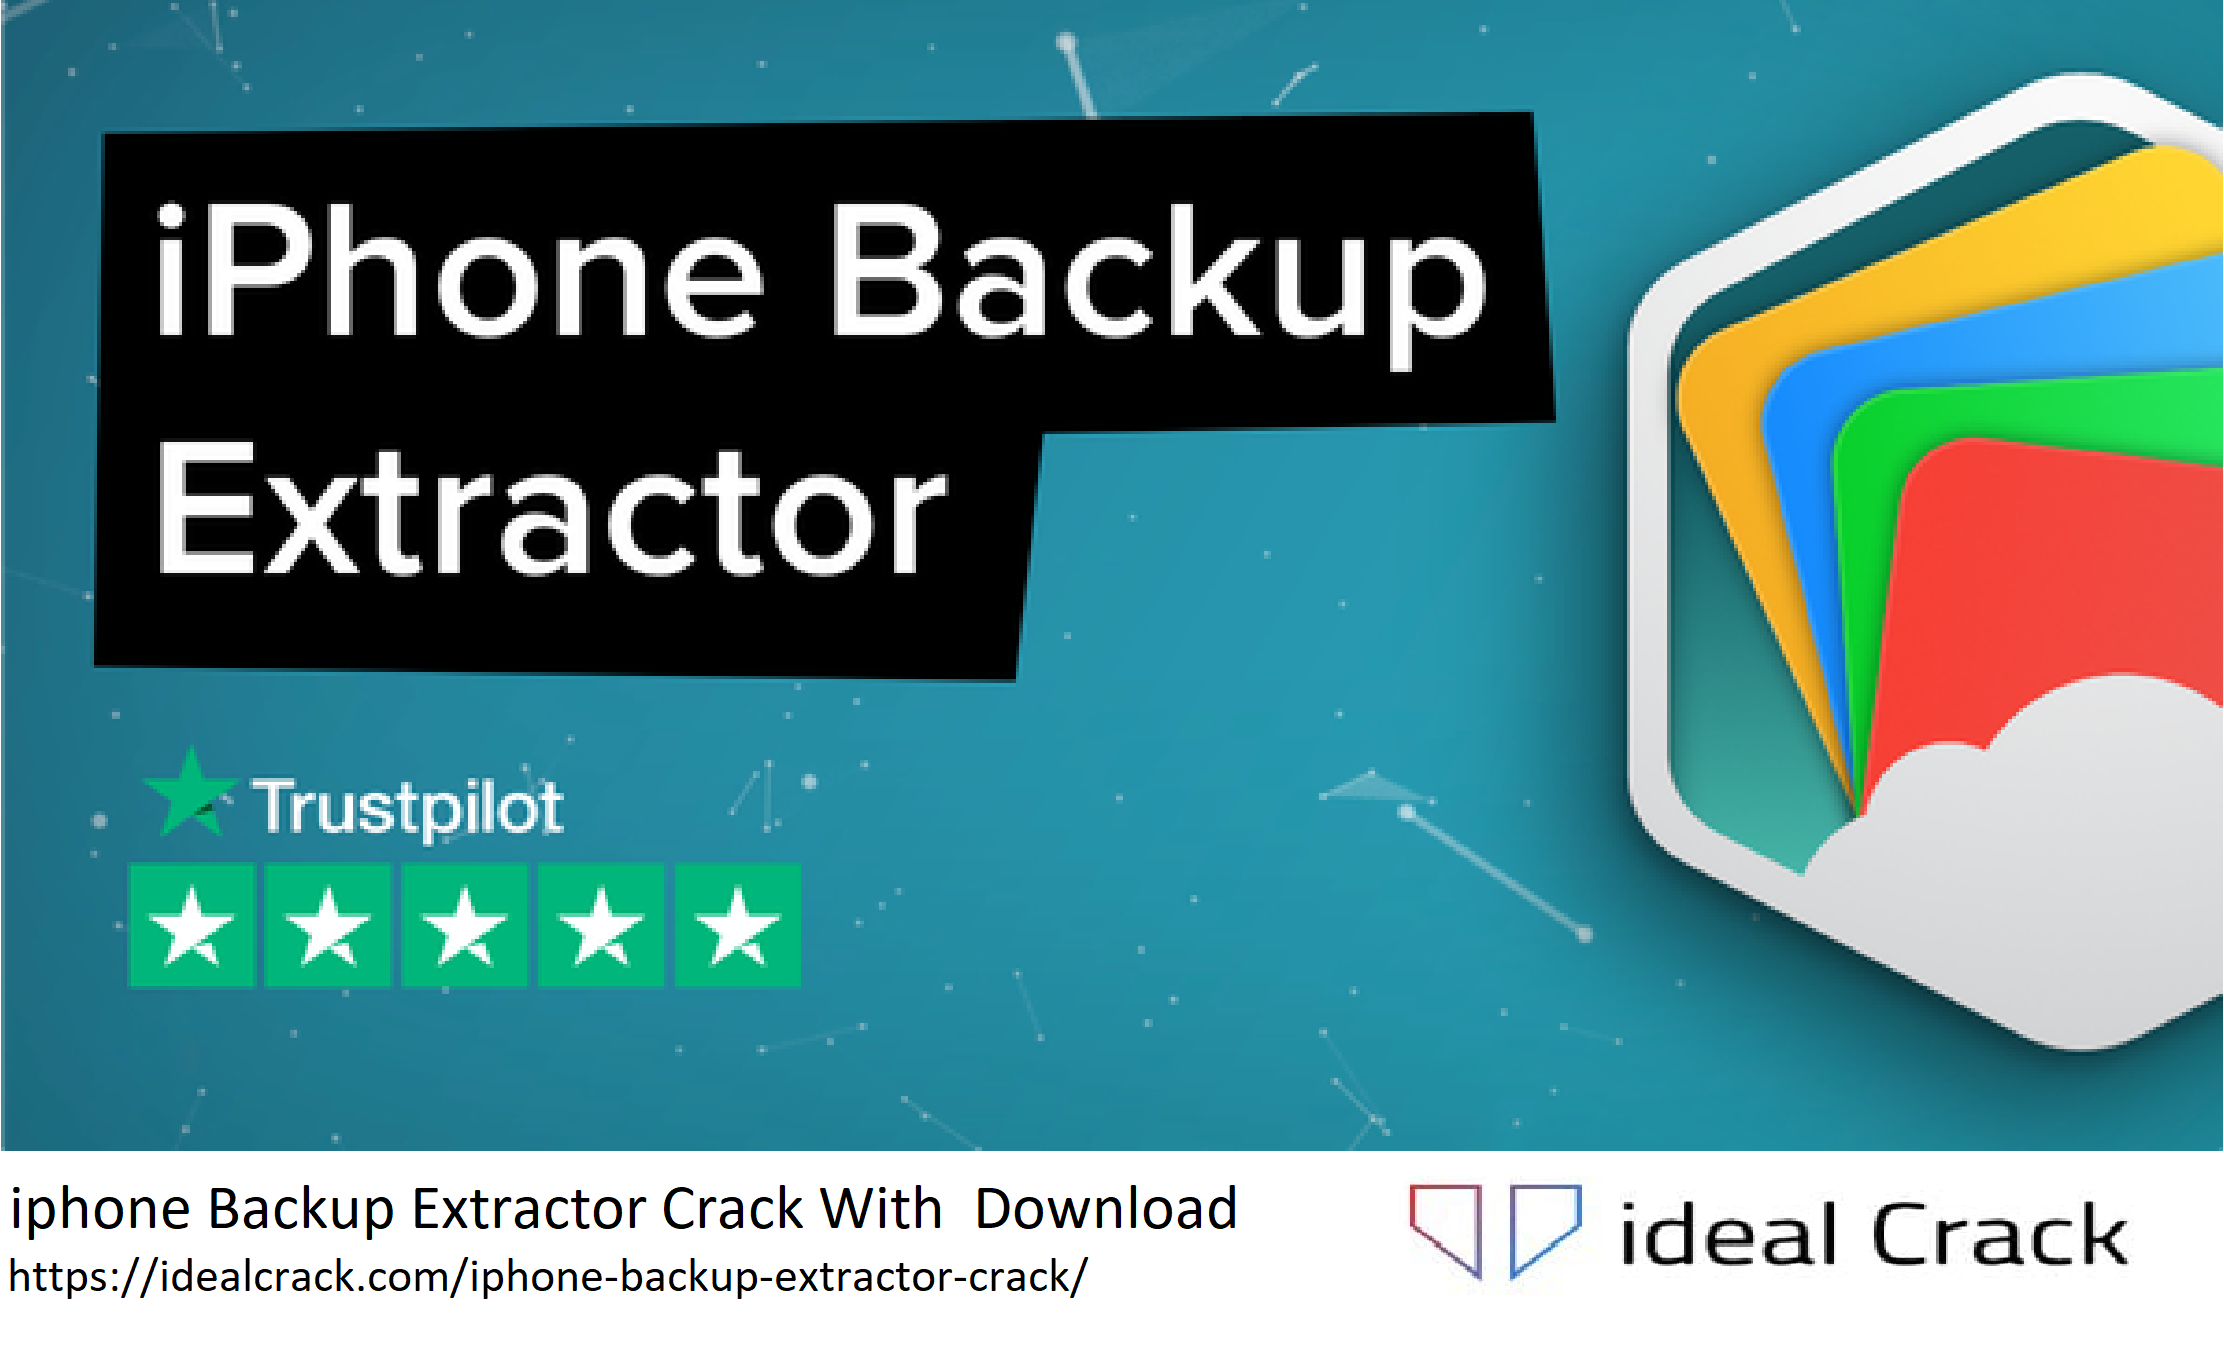 iphone Backup Extractor Crack With Download 2022